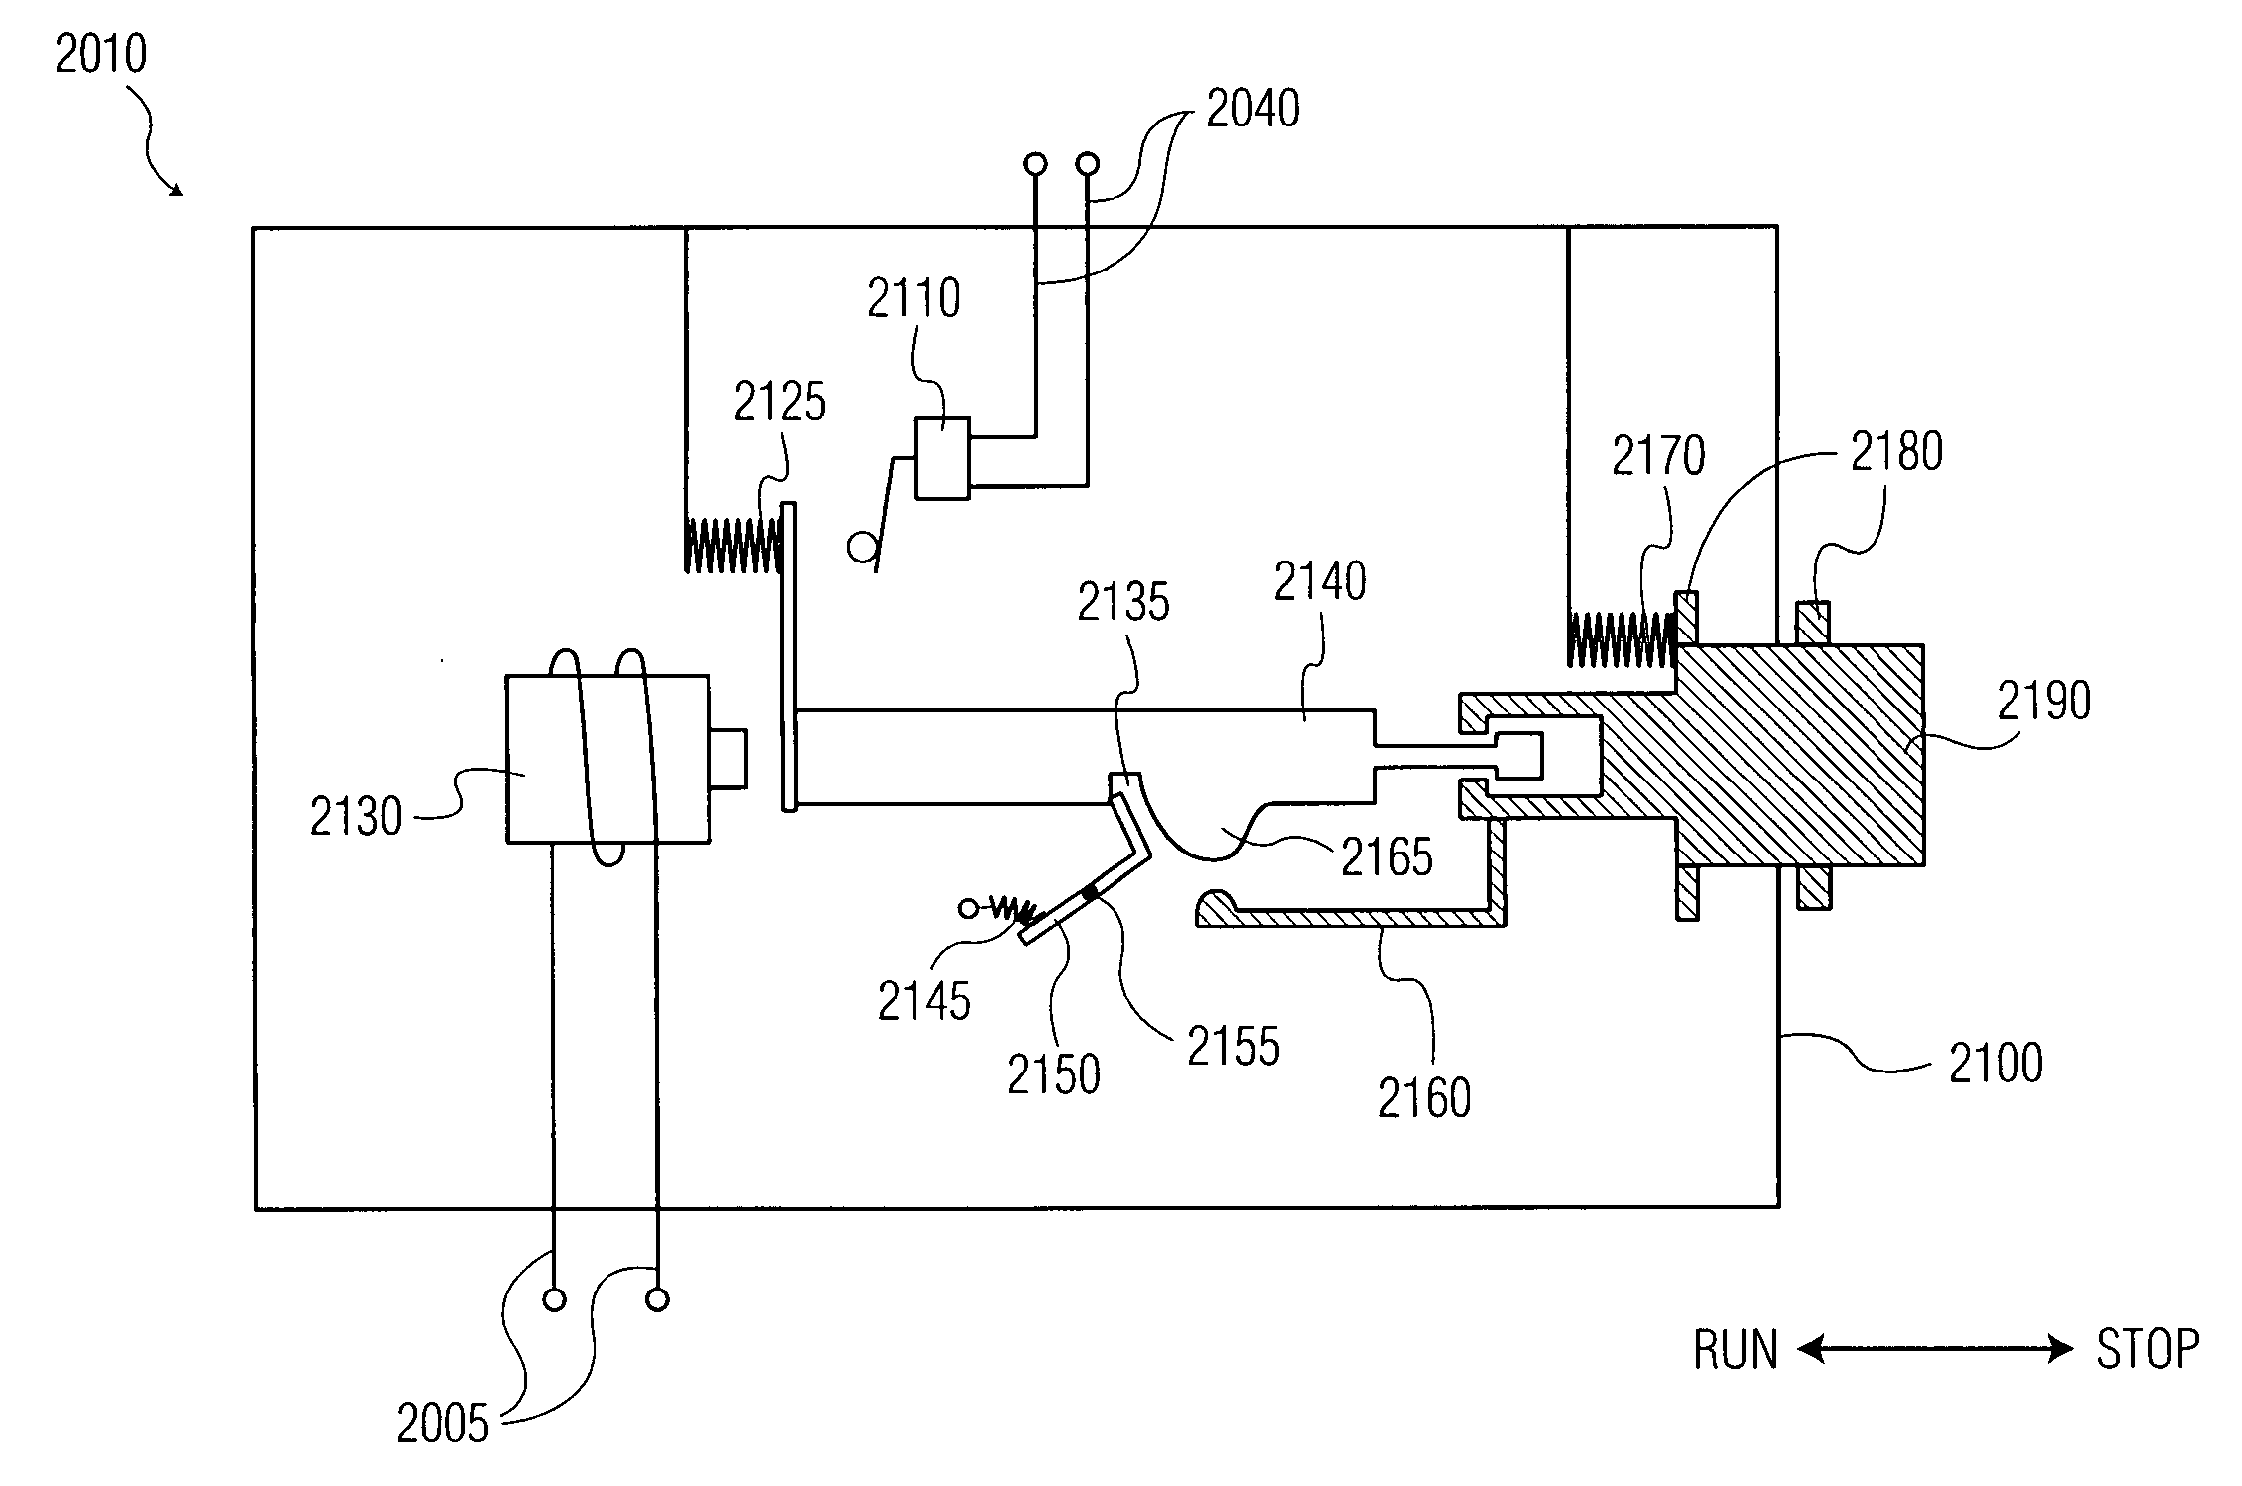 Electromechanical Switch for Controlling Toxic Gas